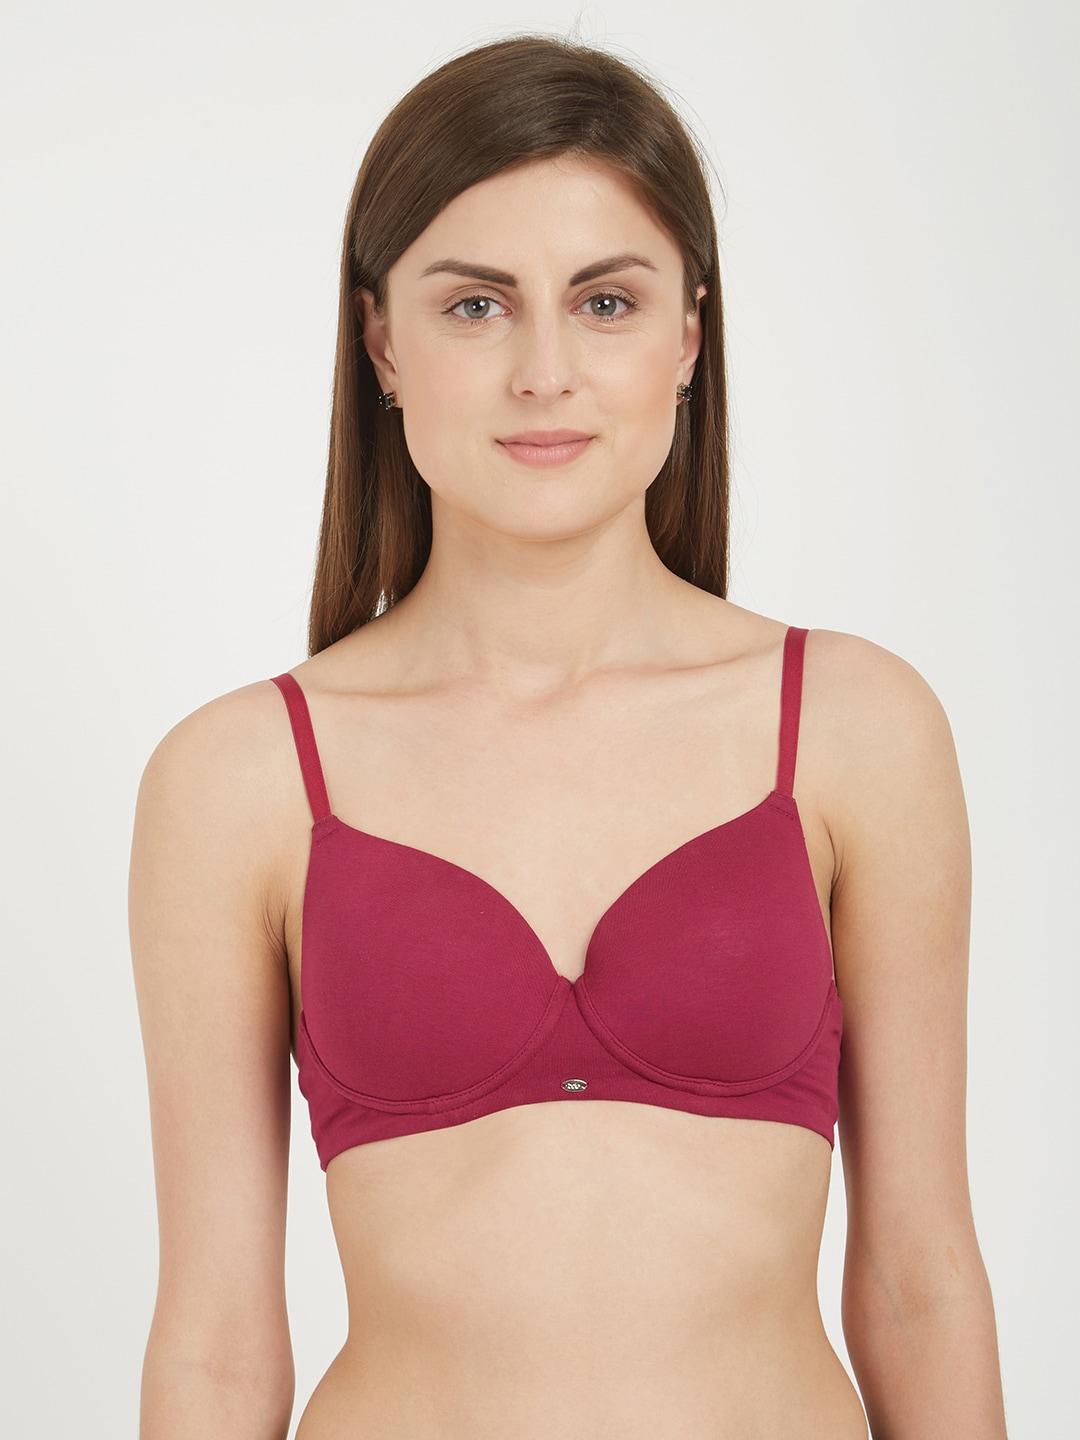 soie-maroon-solid-non-wired-lightly-padded-t-shirt-bra-cb-123